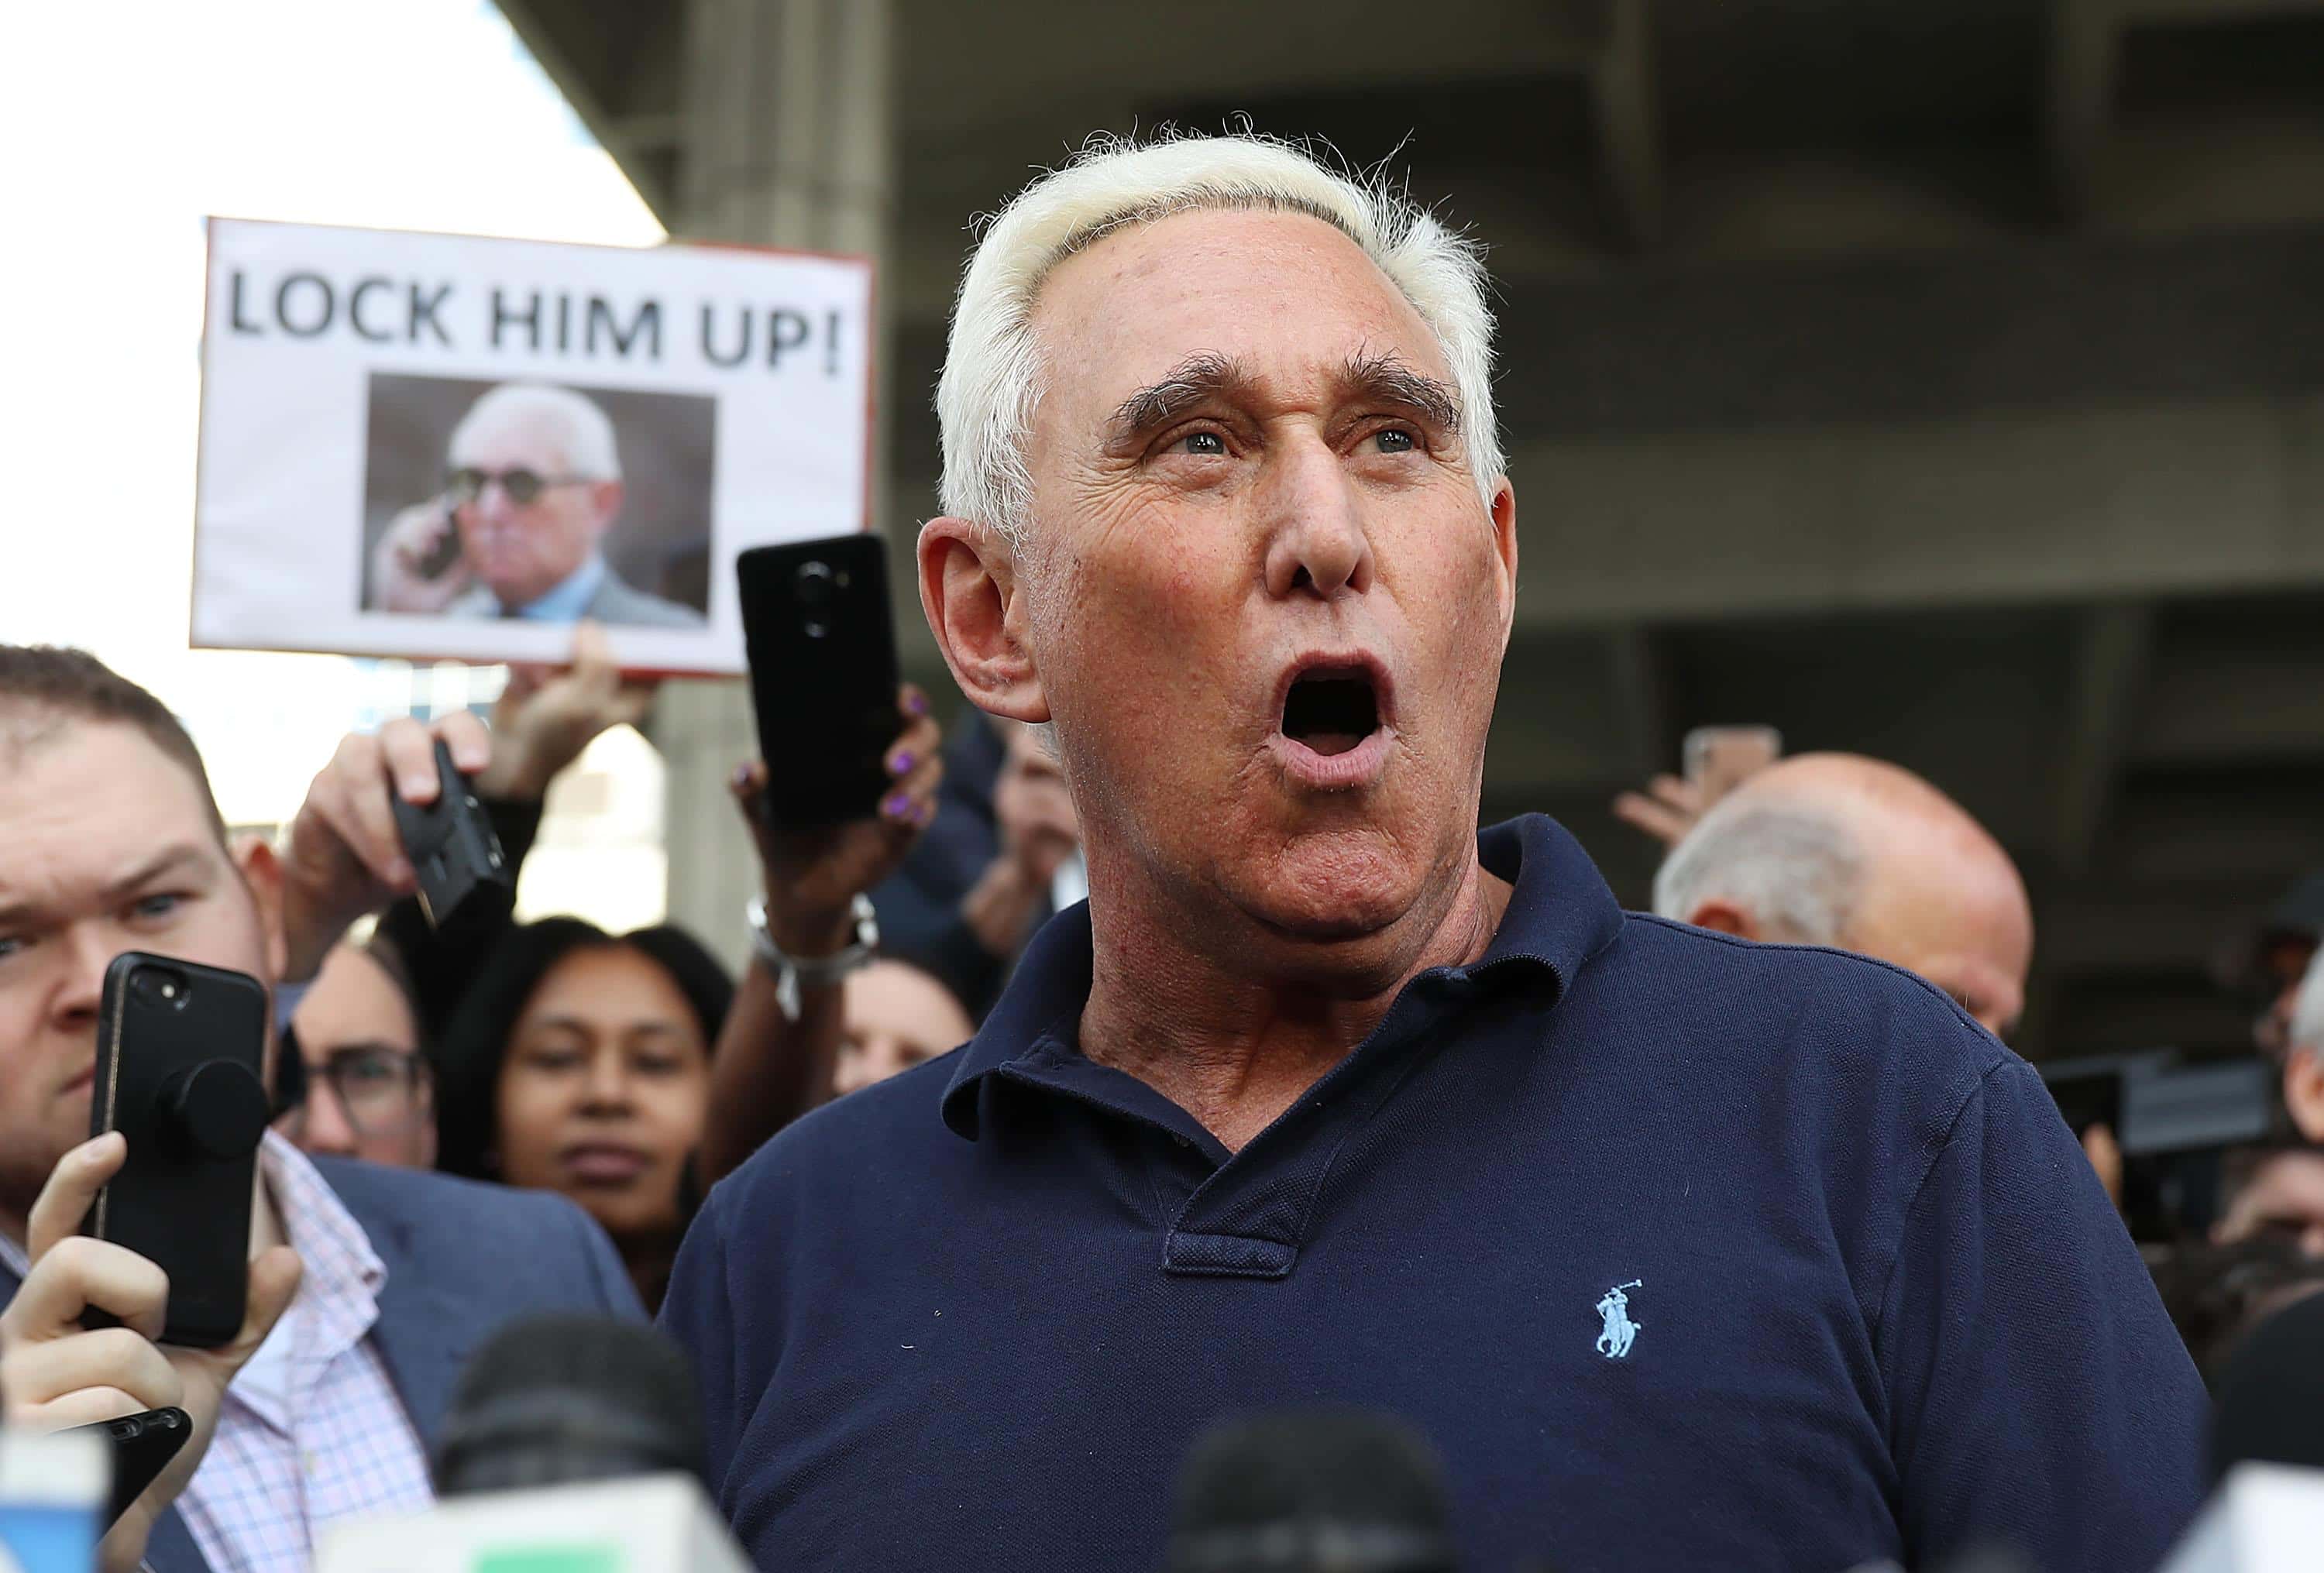 former-trump-associate-roger-stone-arrested-in-charges-related-to-mueller-investigation